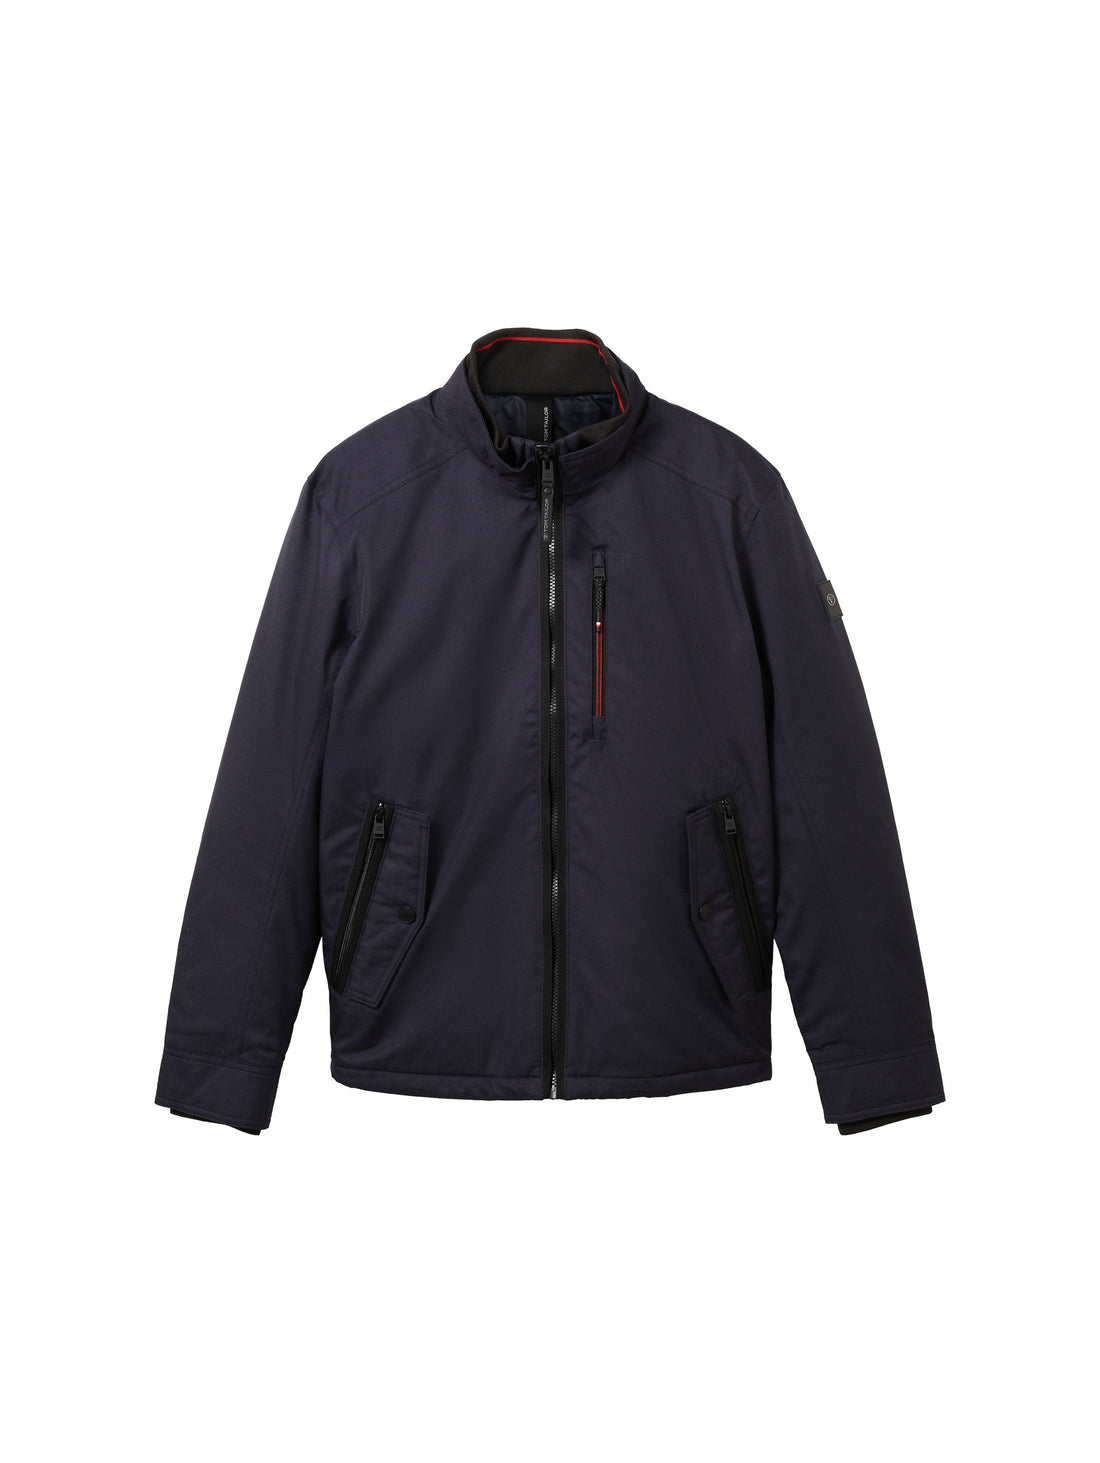 Padded Jacket With Multiple Pockets_1037331_10668_01